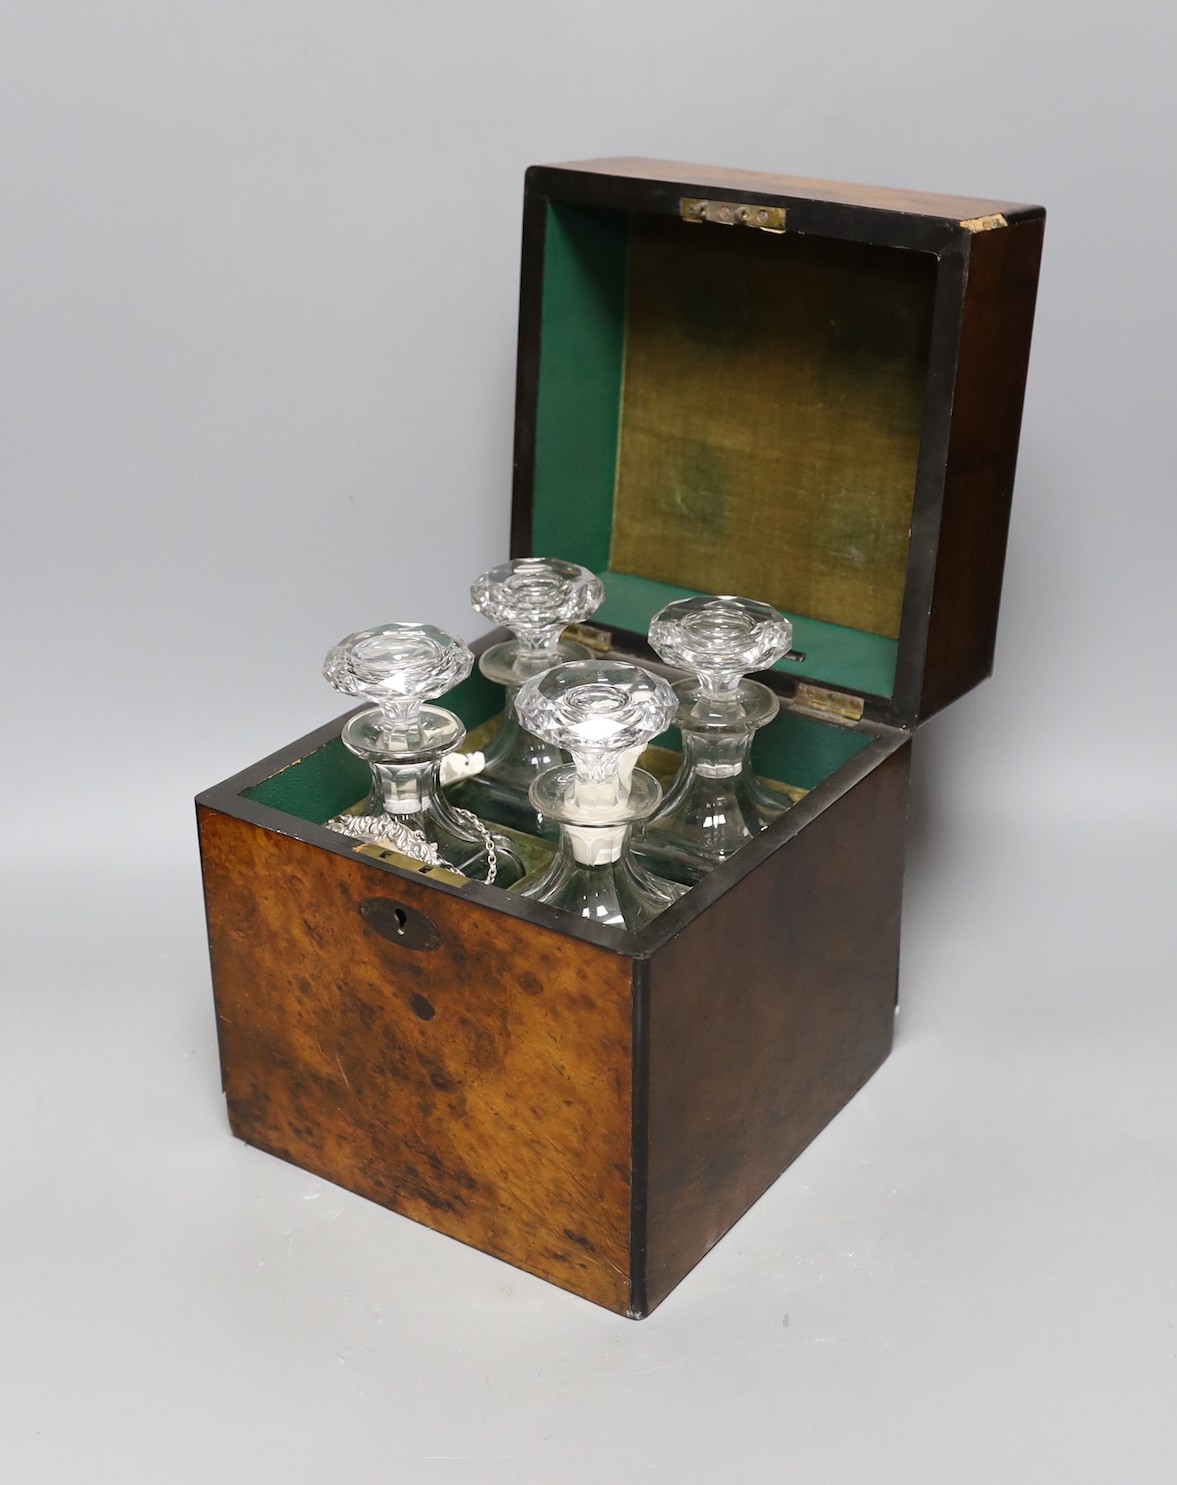 A Victorian burr walnut 4 bottle decanter box, four glass decanters and a silver ‘port’ label, 24cm high